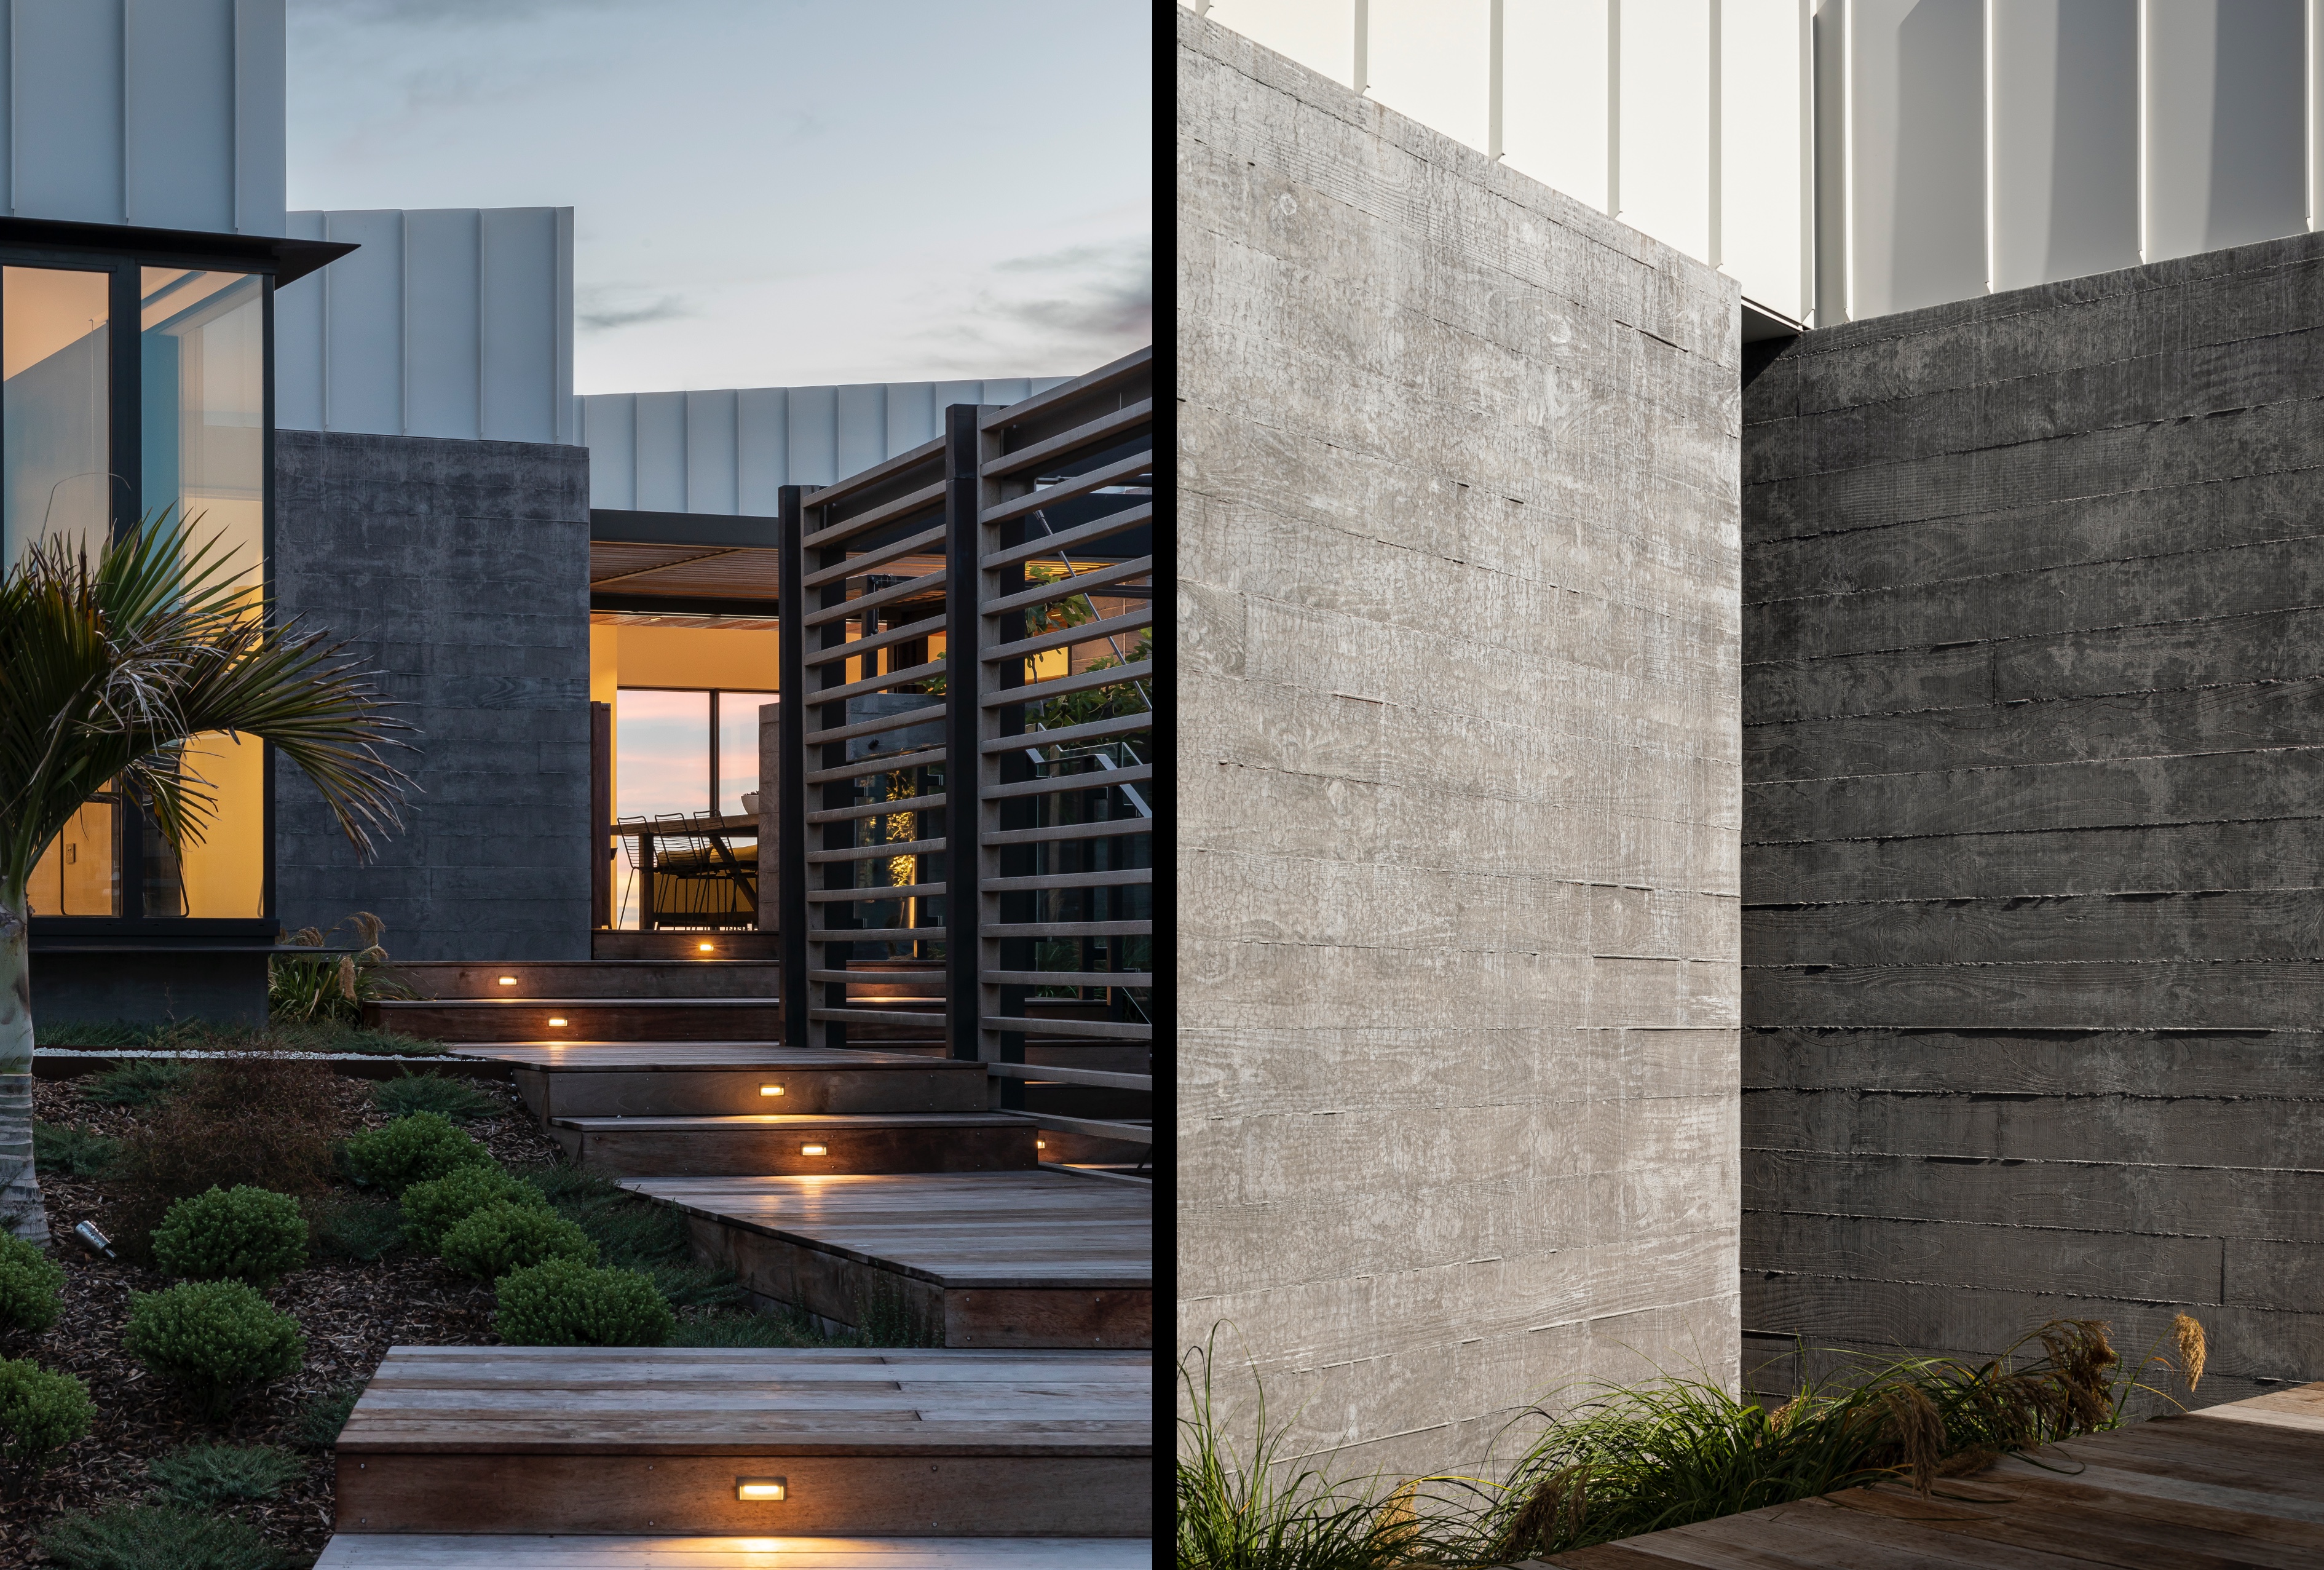 Split image. Left side depicts wooden exterior stairs leading to illuminated house at dusk. Right side depicts textured concrete walls.